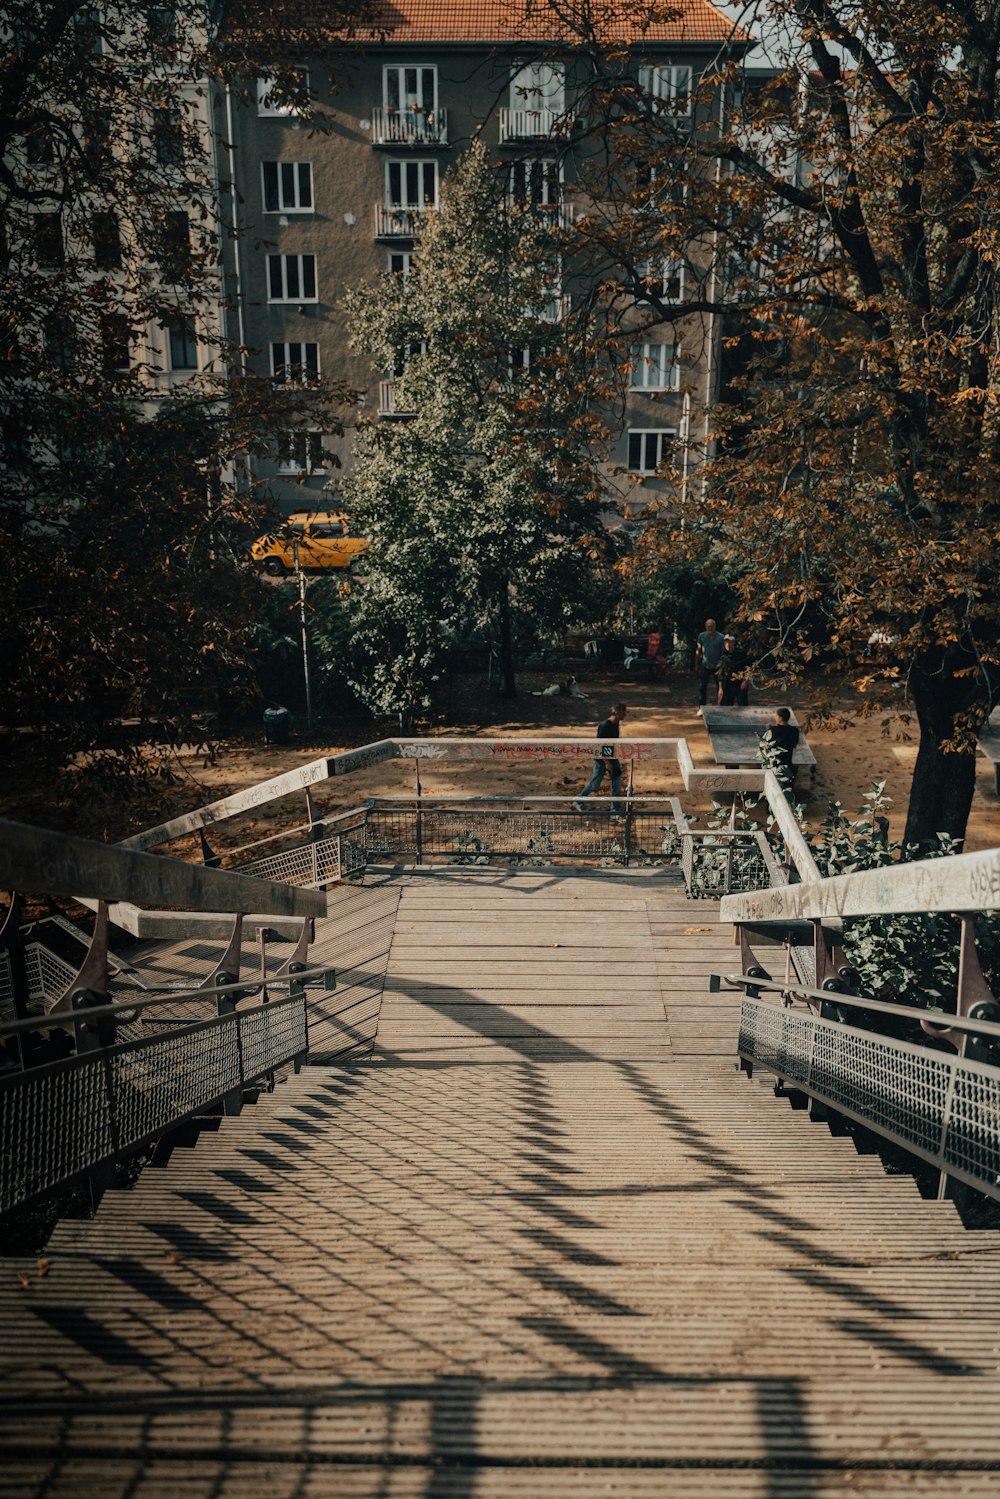 a person walking down a wooden walkway in a park